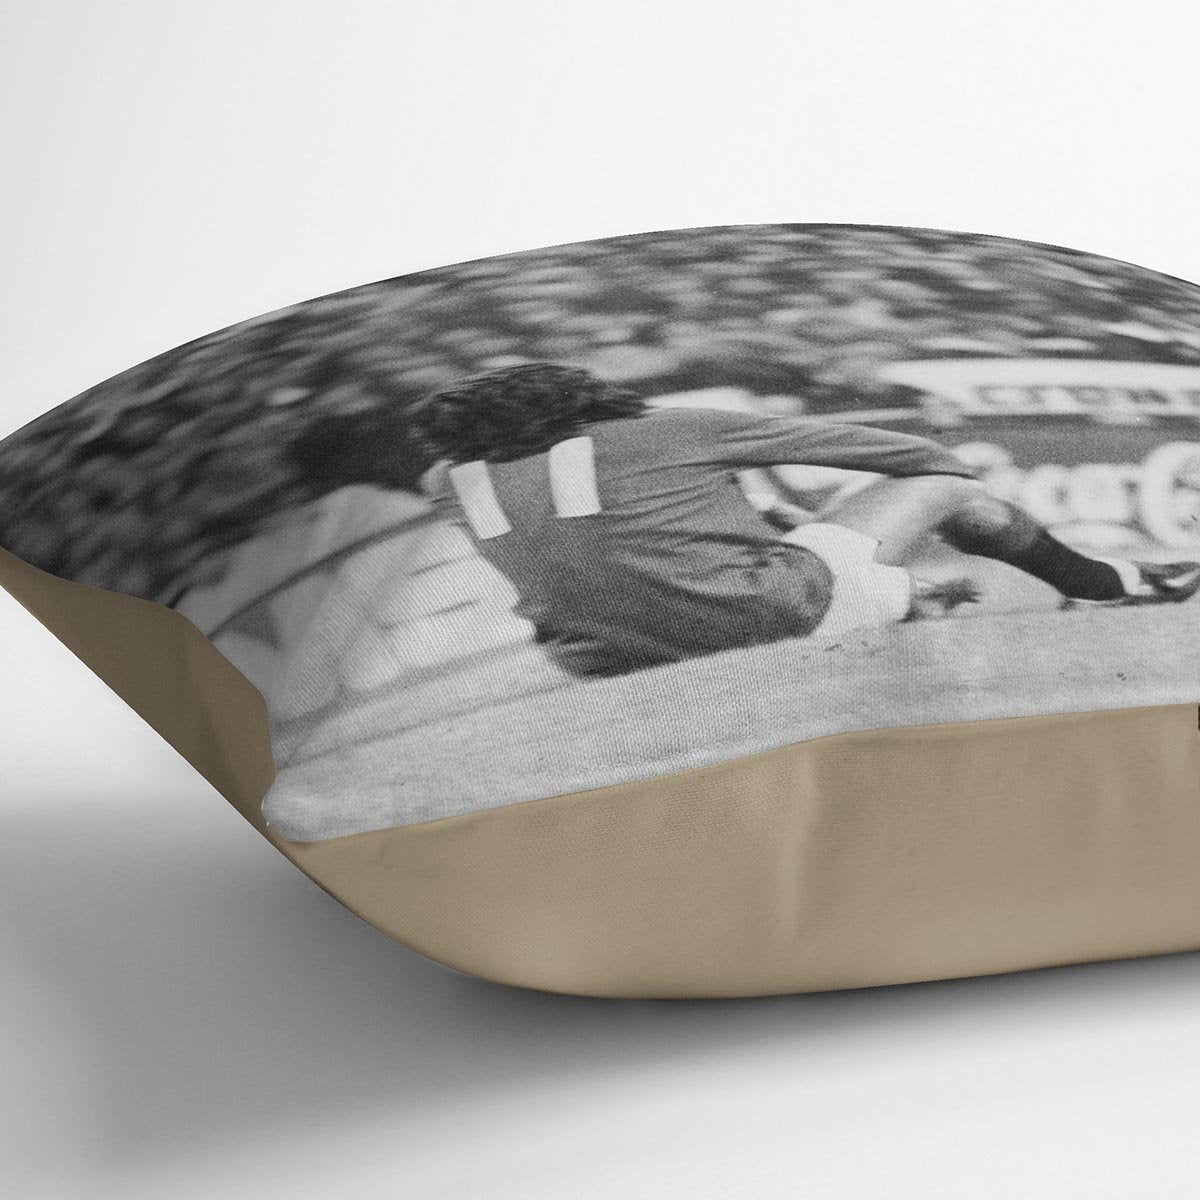 George Best Protest Cushion